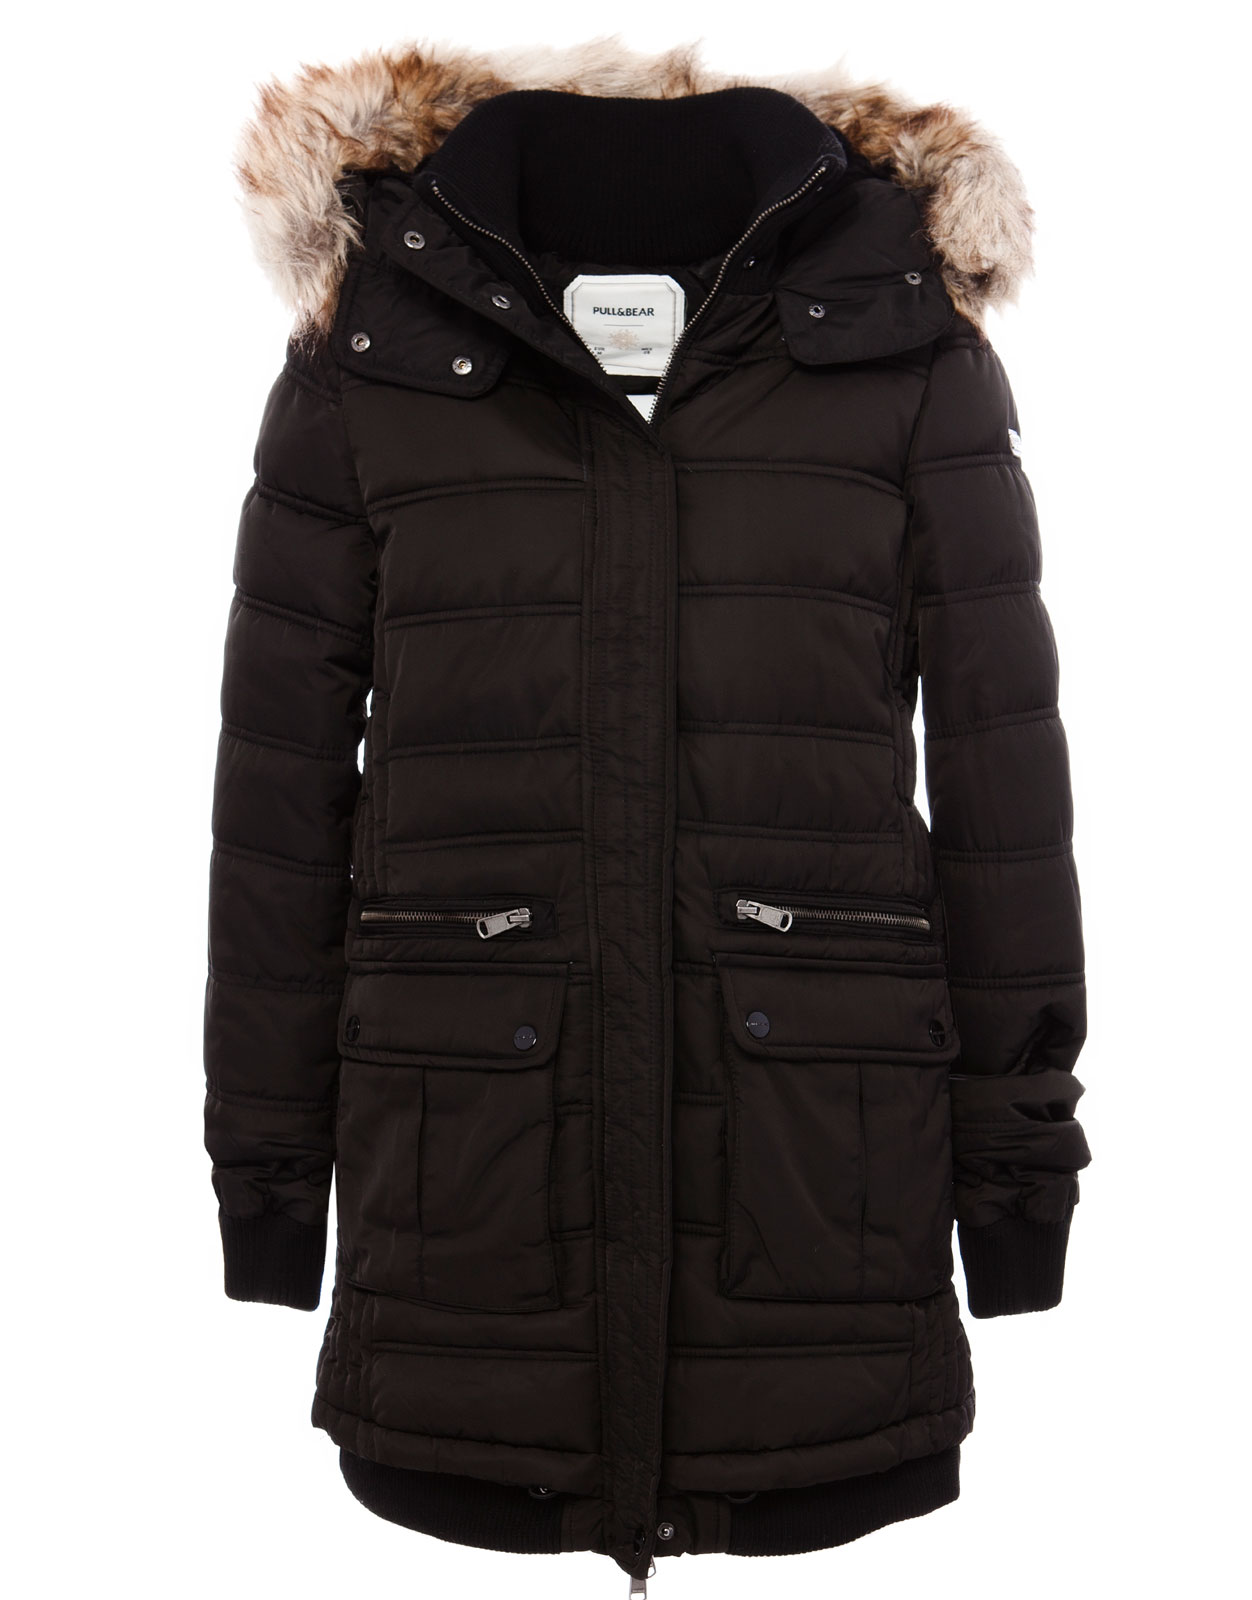 Pull&bear Quilted Nylon Coat in Black | Lyst